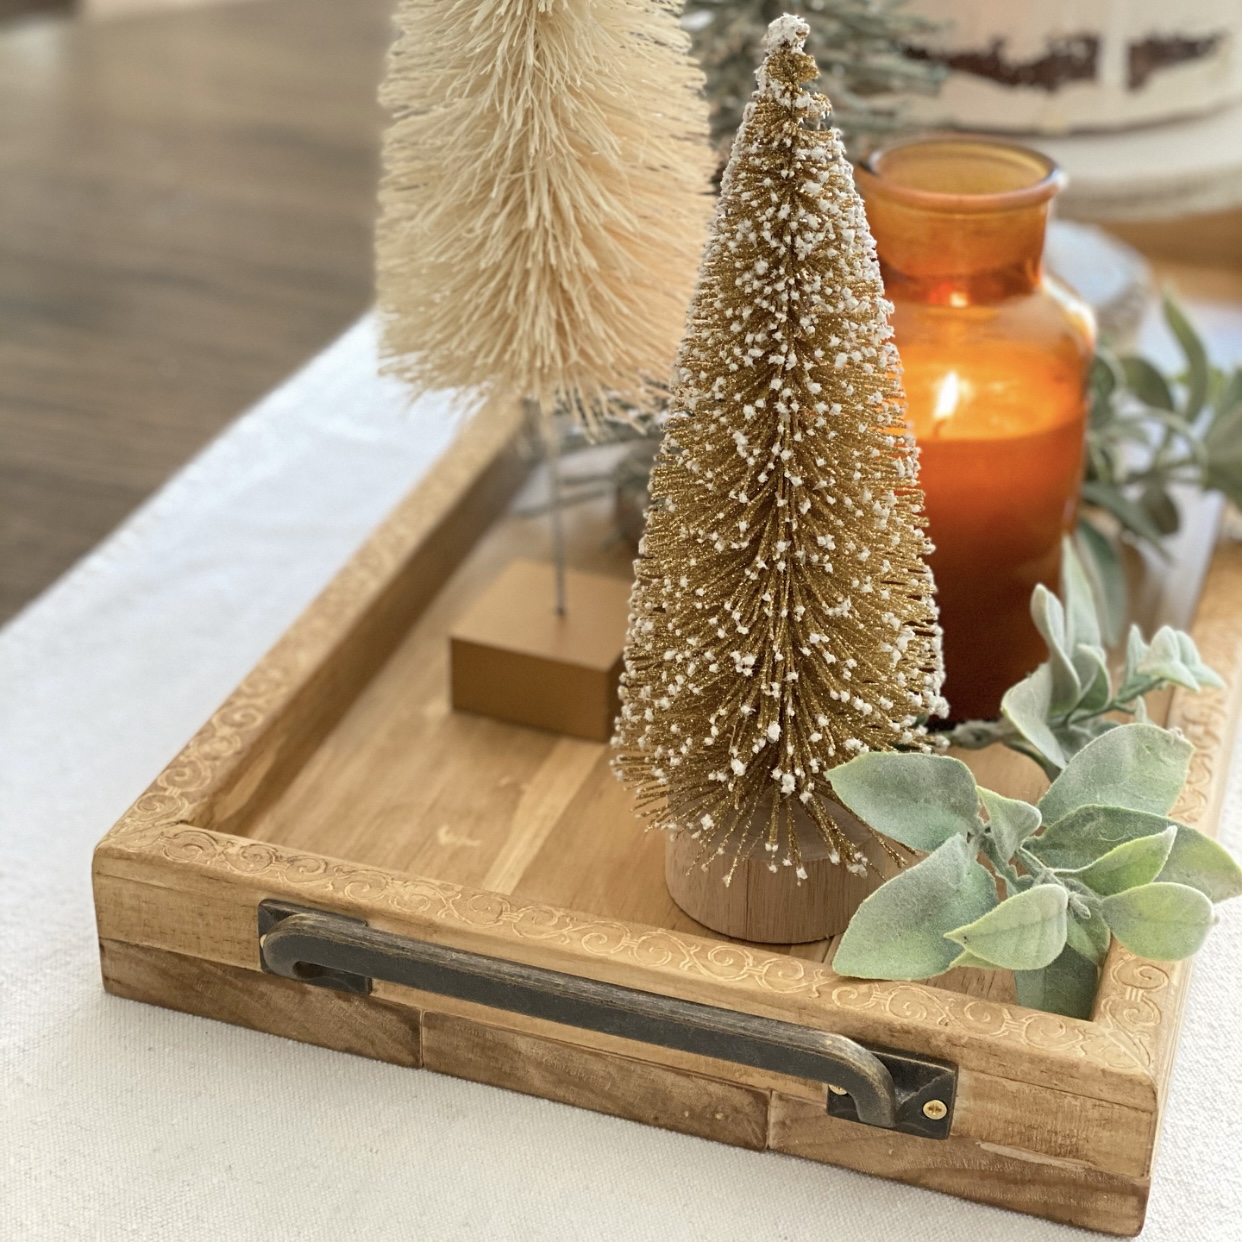 Side view of DIY Wood Farmhouse Tray with bottle brush trees on it.